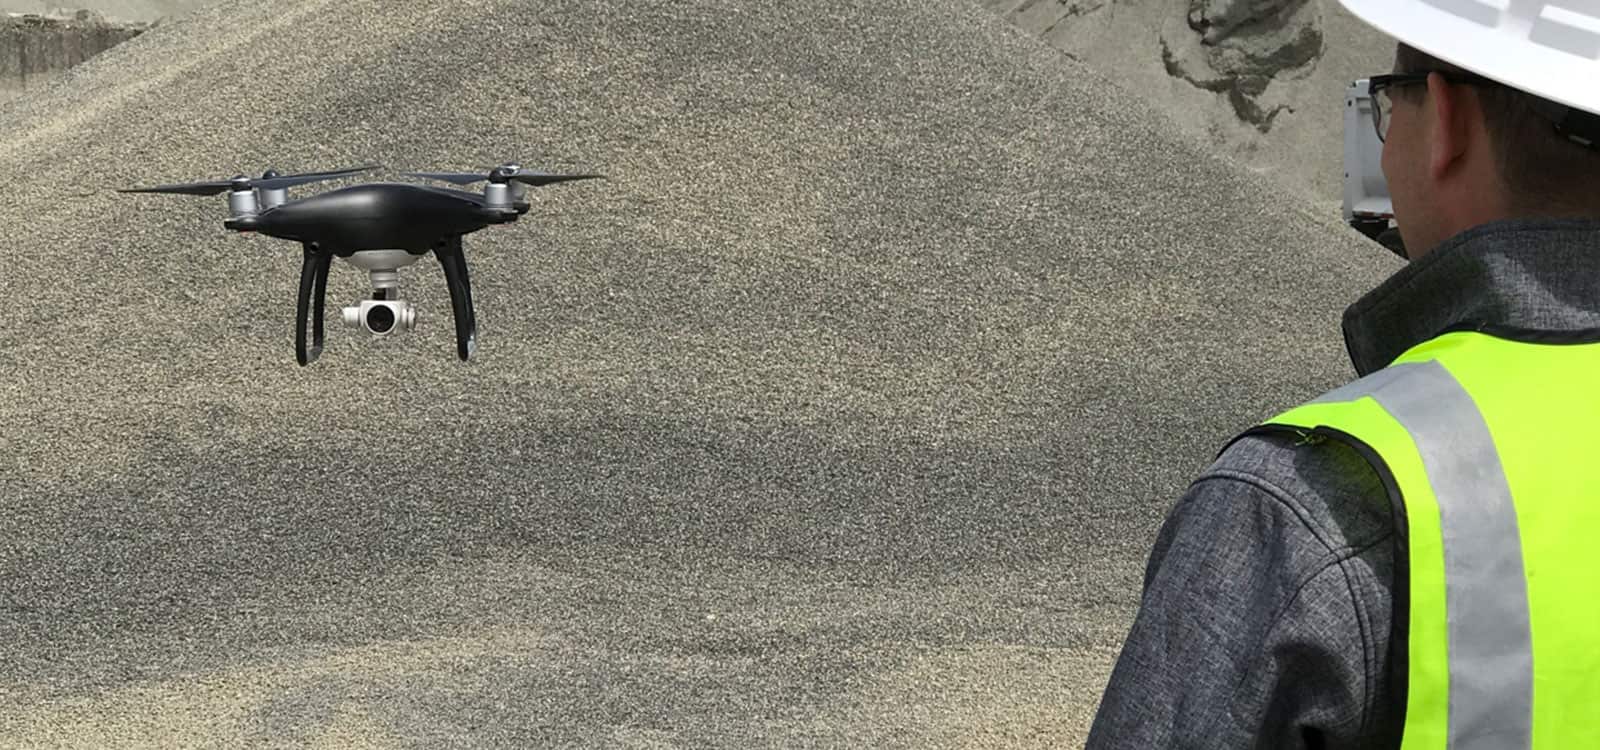 13 Drone Mistakes You Can't Afford to Make | Stockpile Reports